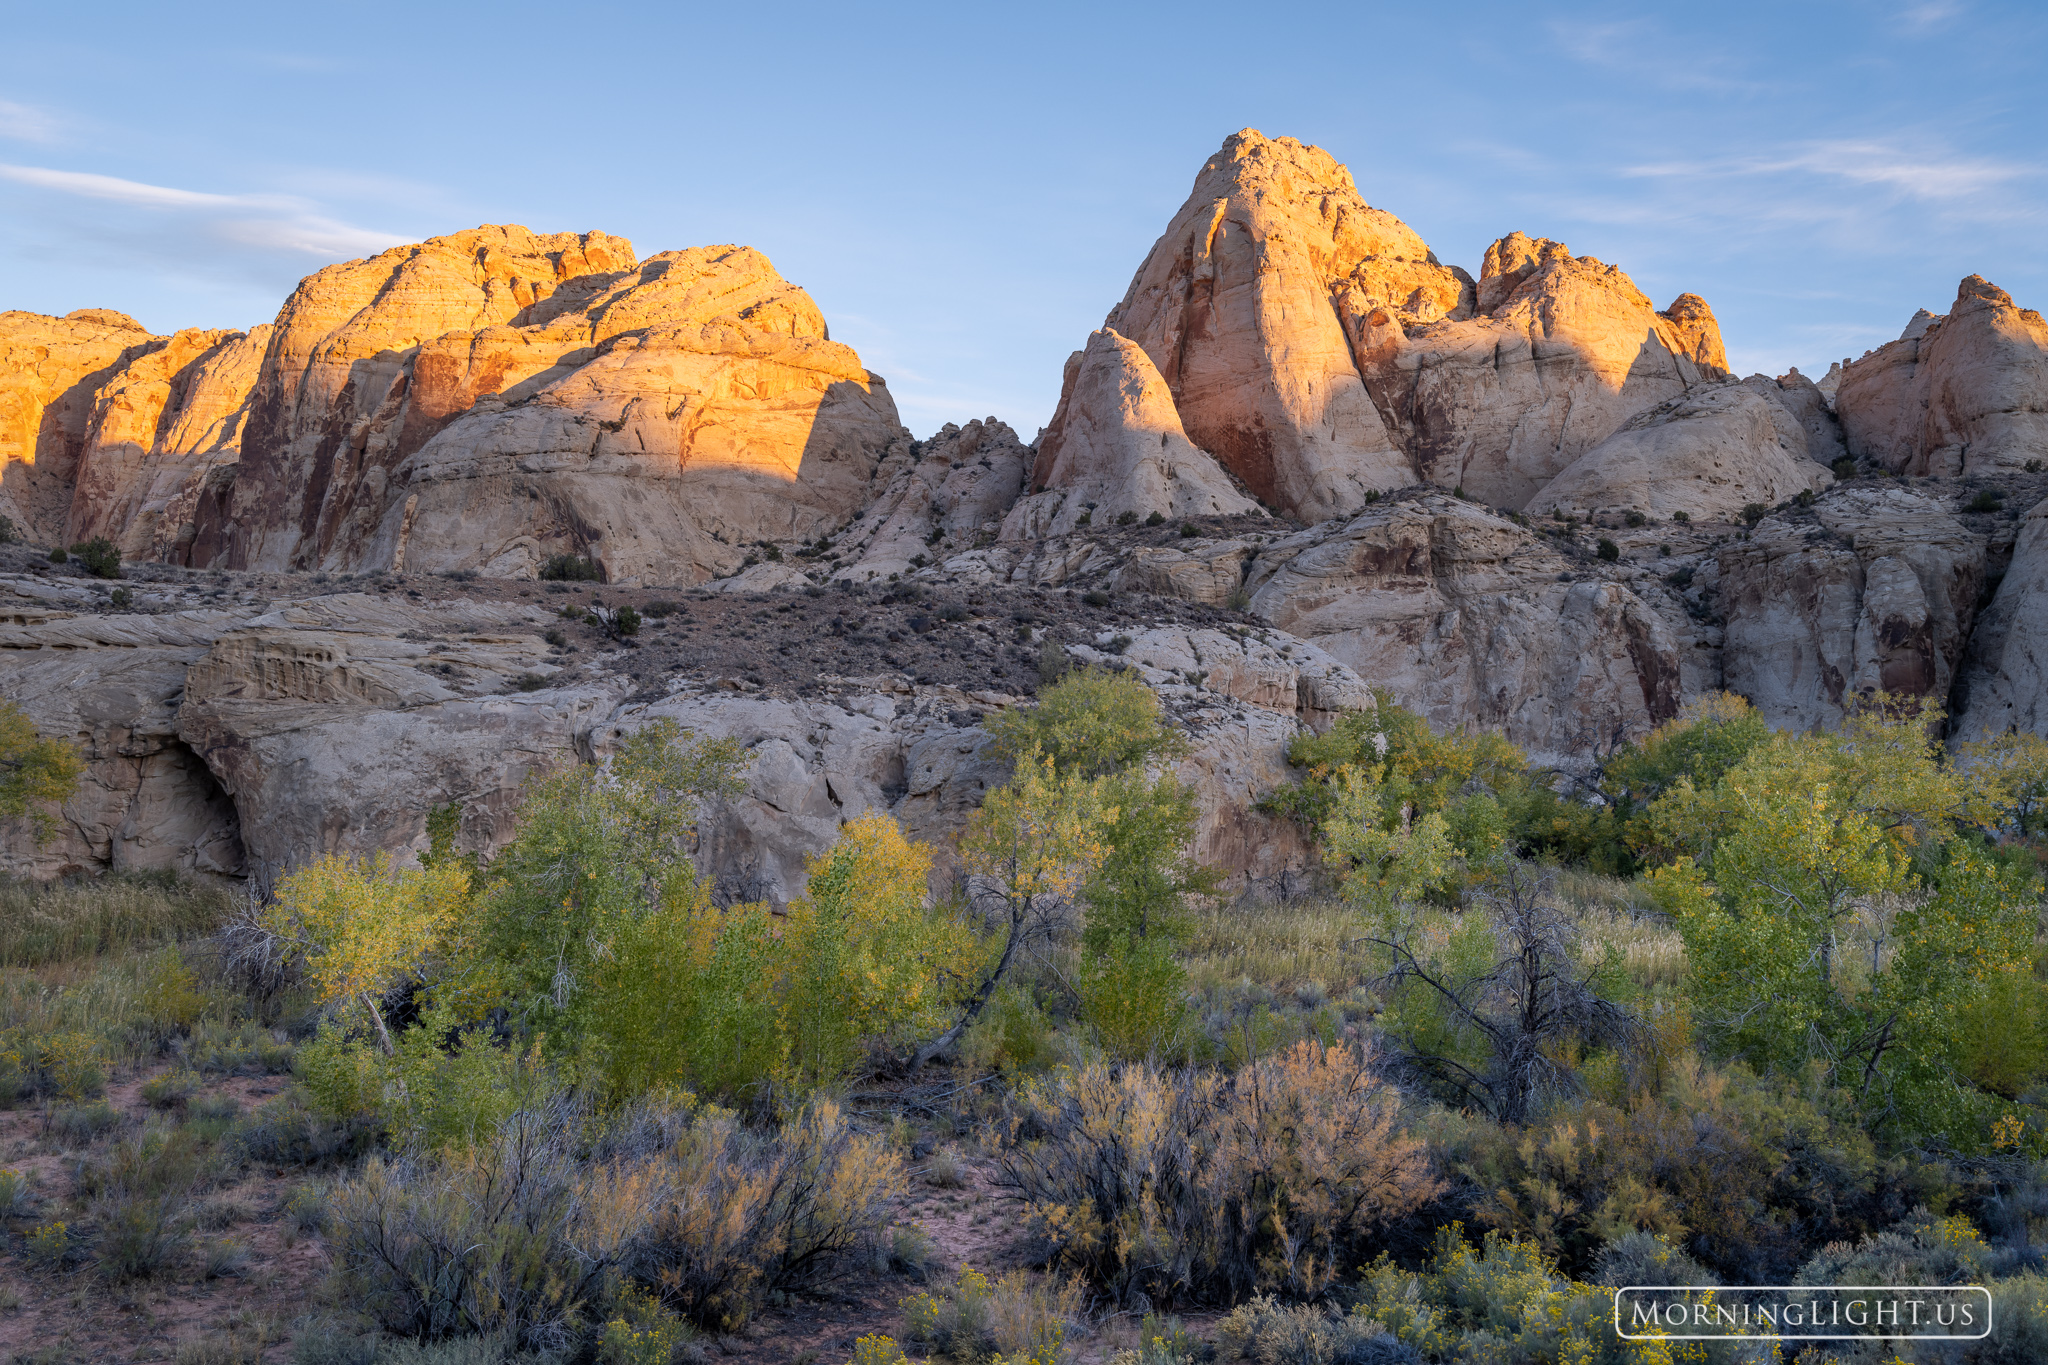 The leaves were just beginning to turn in Capitol Reef National Park, but even in the early stage of autumn, they added a real...